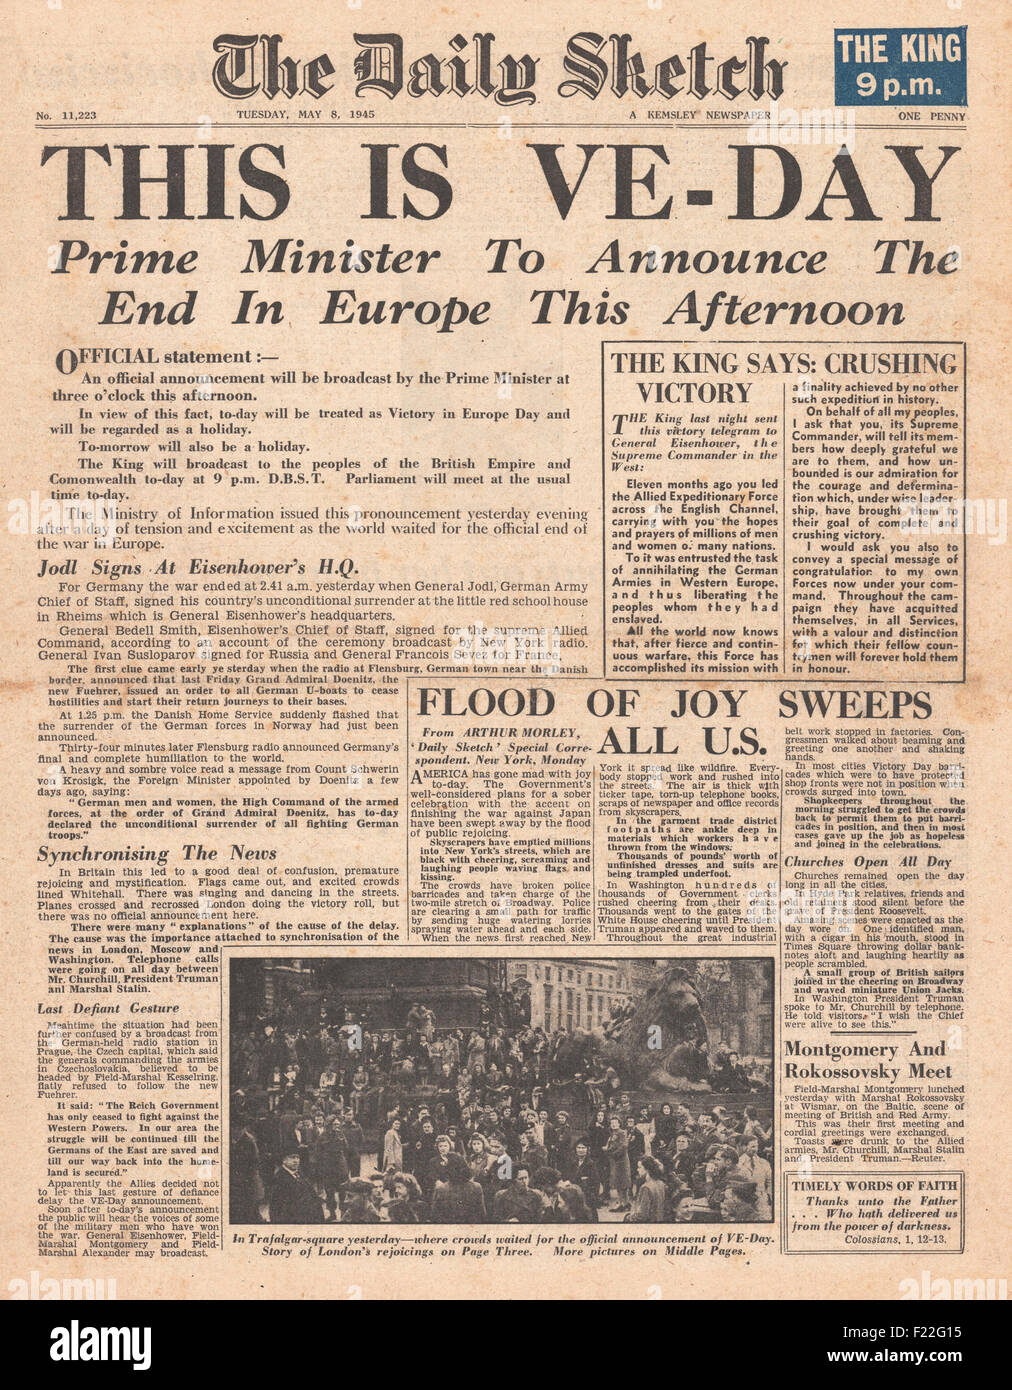 1945 VE DAY Newspaper Daily Sketch World War II Victory in Europe Celebrations 